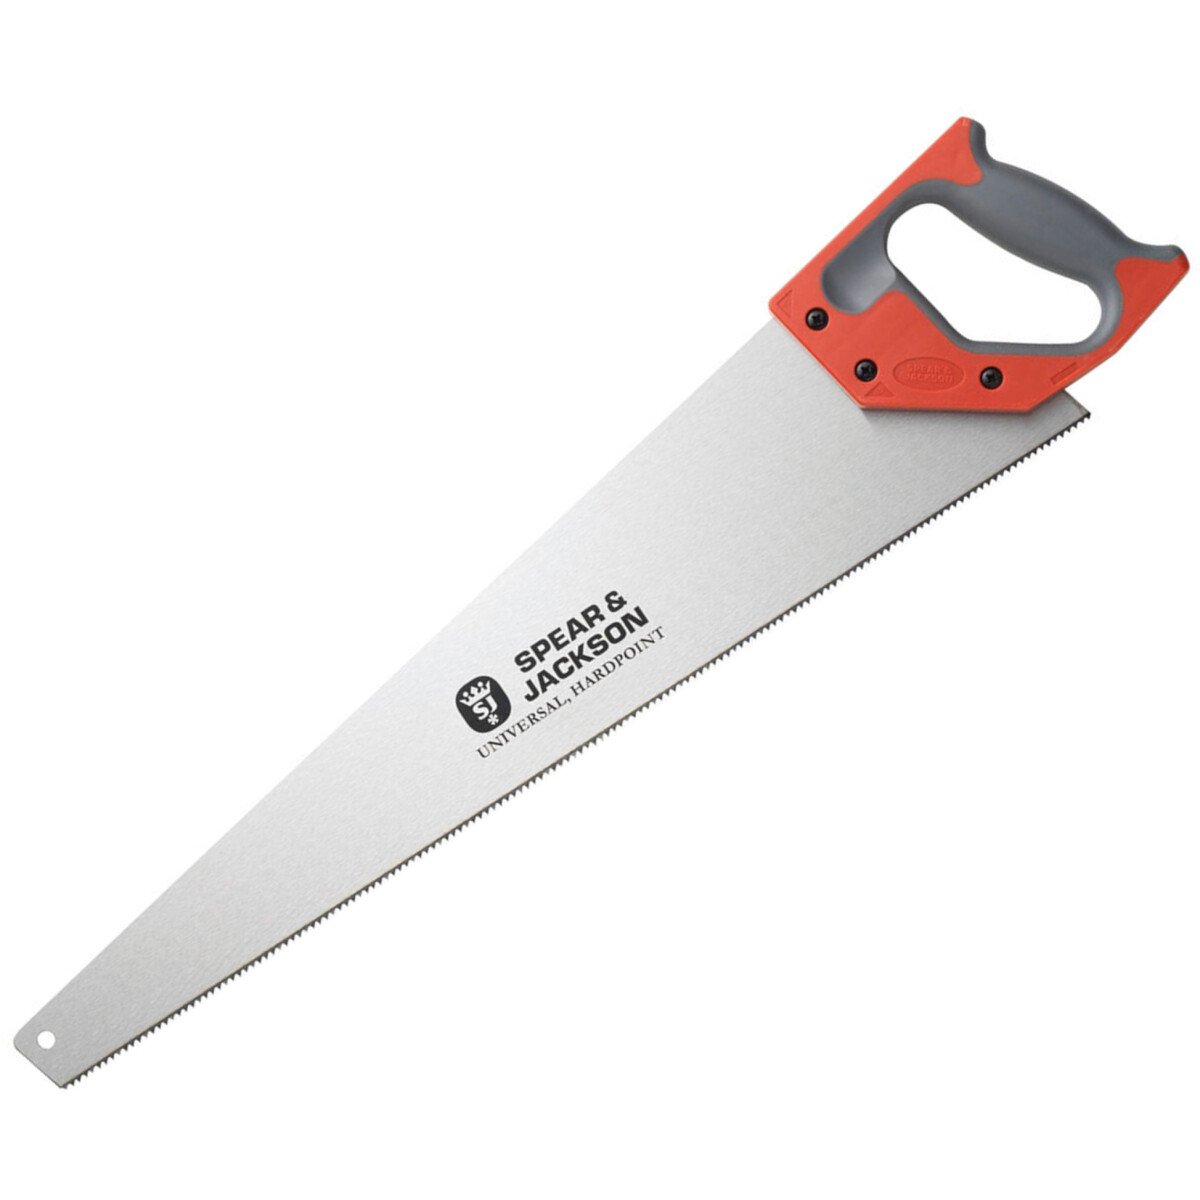 Spear and Jackson B9522 22" Universal Hardpoint 8pts Hand Saw 559mm